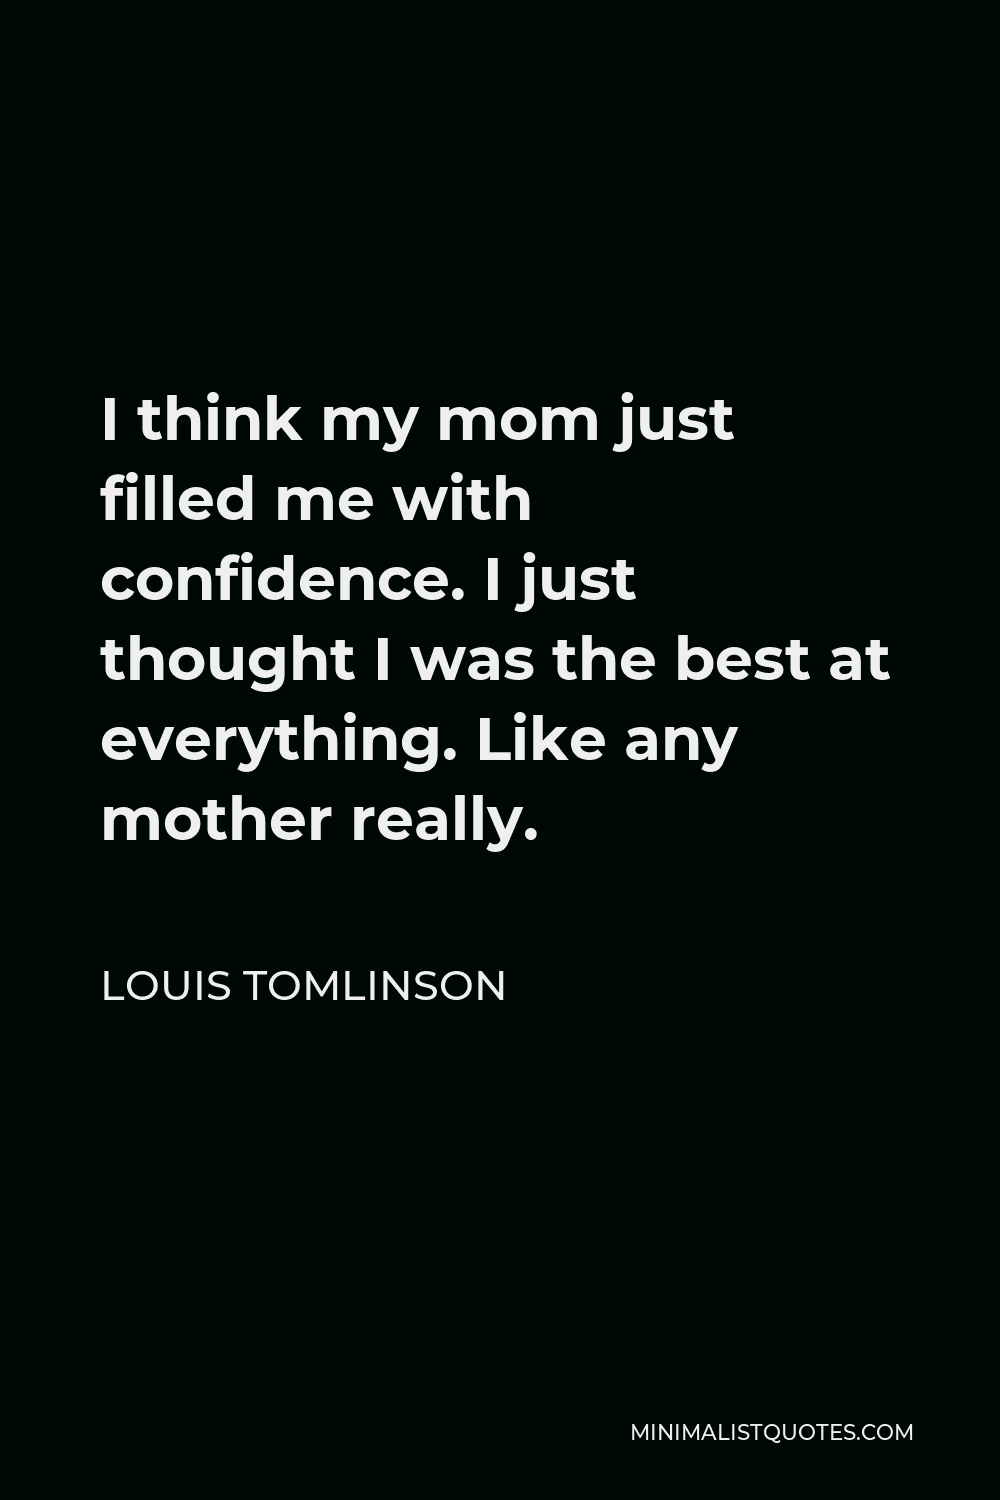 Louis Tomlinson Quote - I think my mom just filled me with confidence. I just thought I was the best at everything. Like any mother really.